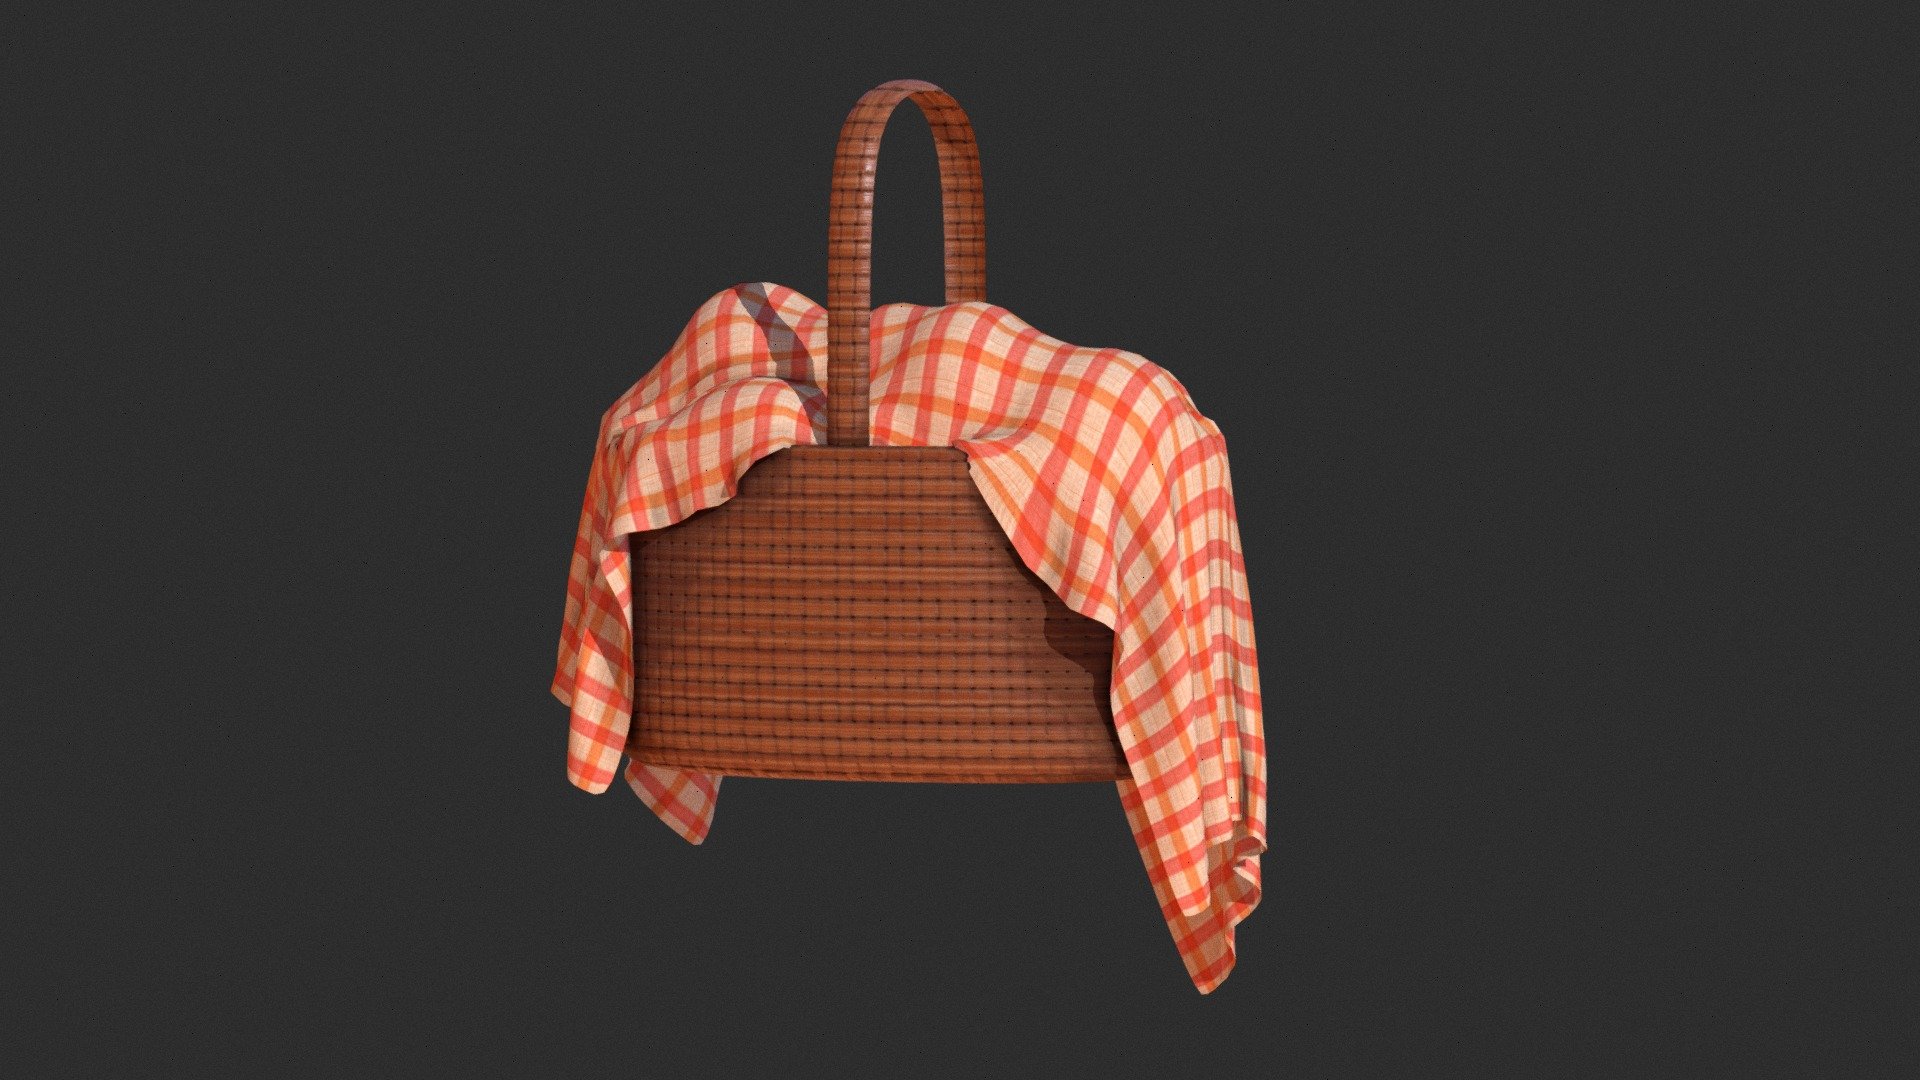 Wicker basket with checkered cloth - Wicker basket with checkered cloth - Download Free 3D model by Tijerín Art Studio (@tijerin_art) 3d model